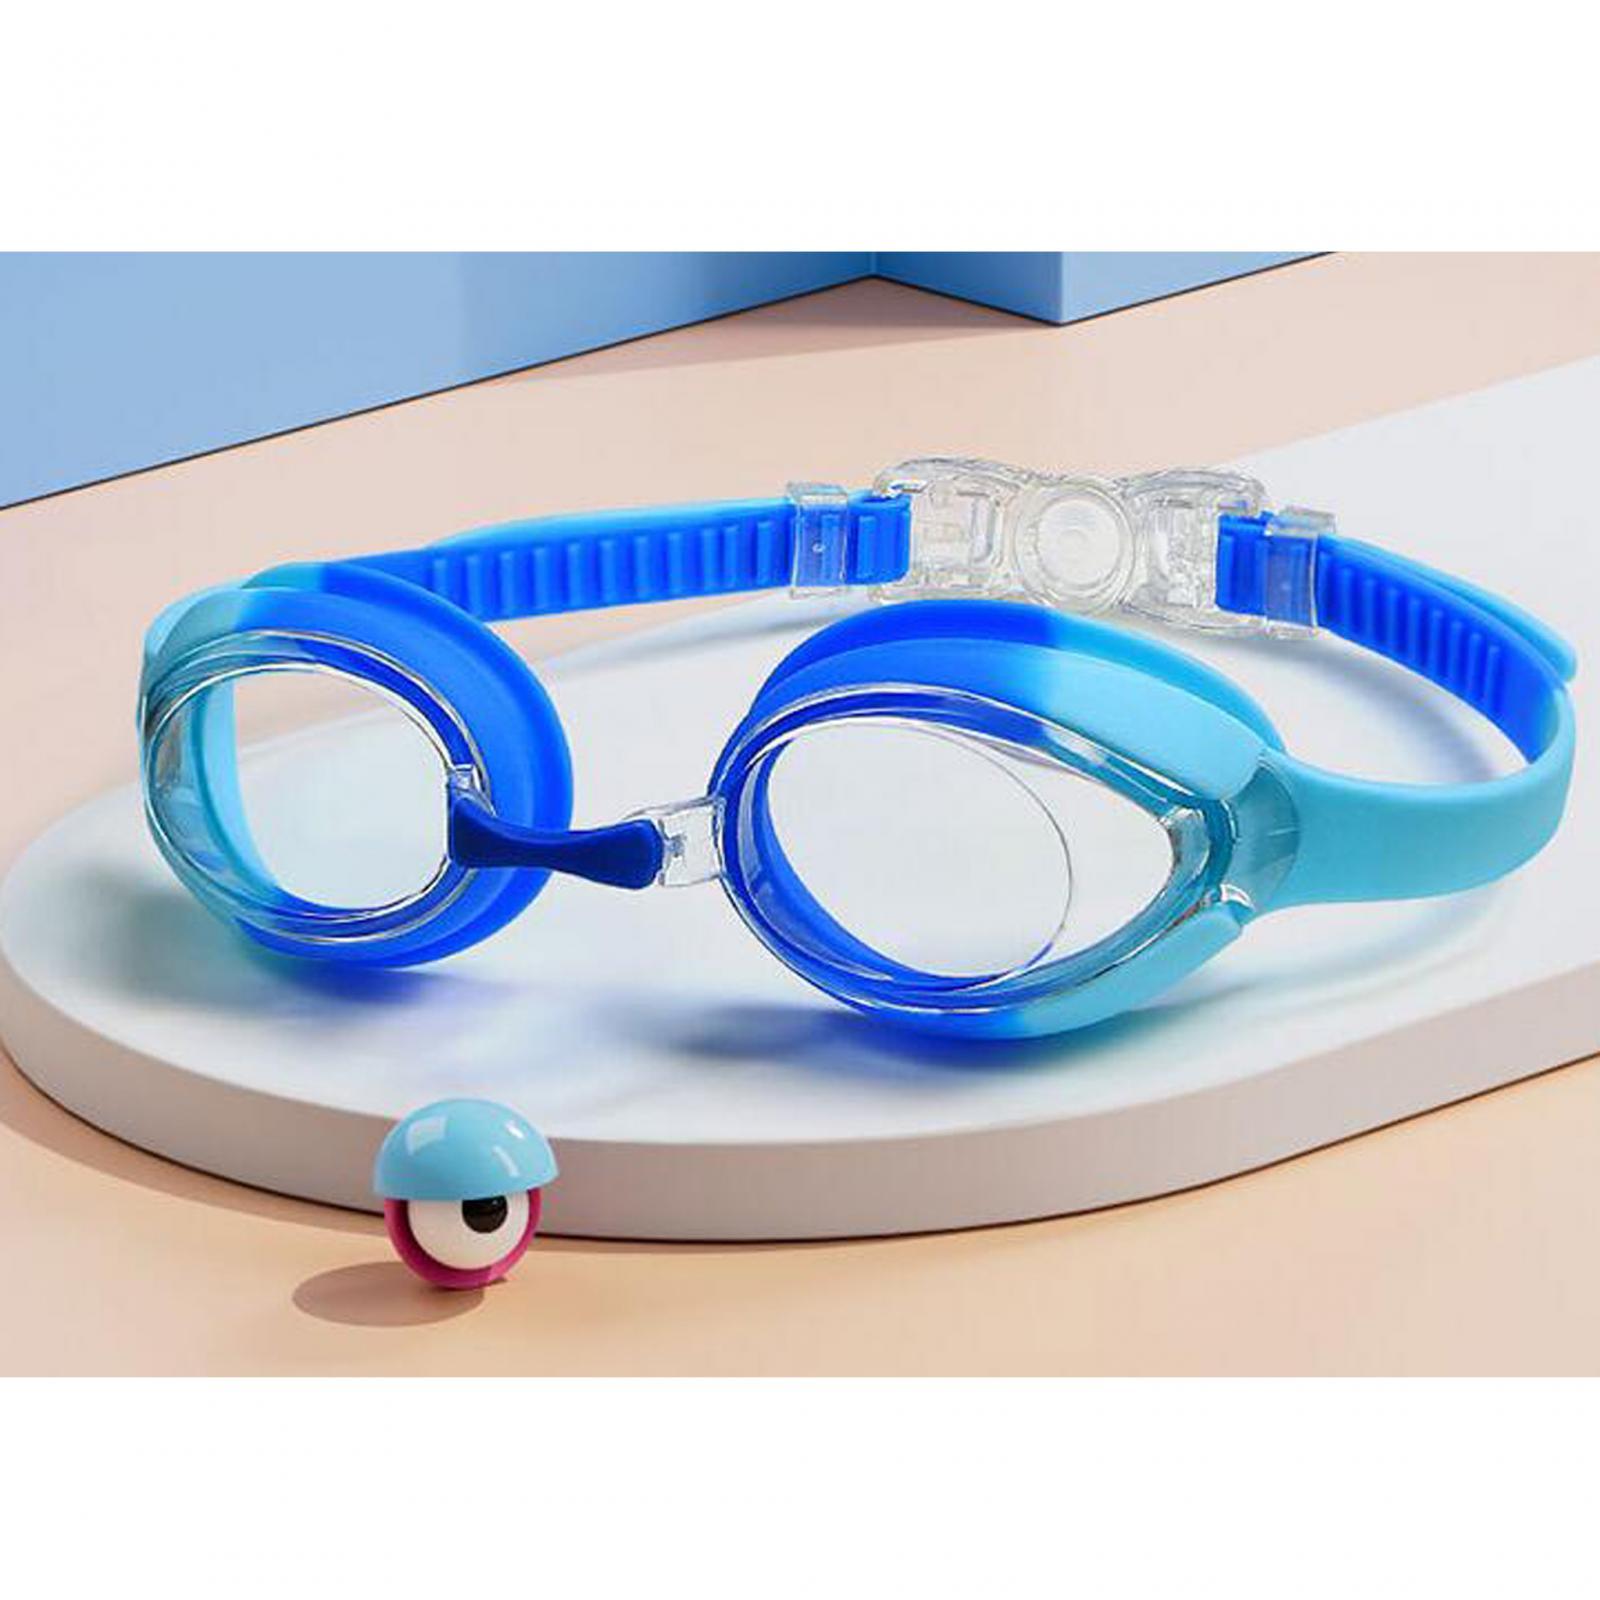 Swimming Goggles Comfortable No Leaking Clear Vision Boys Girls Swim Goggles Clear and Blue